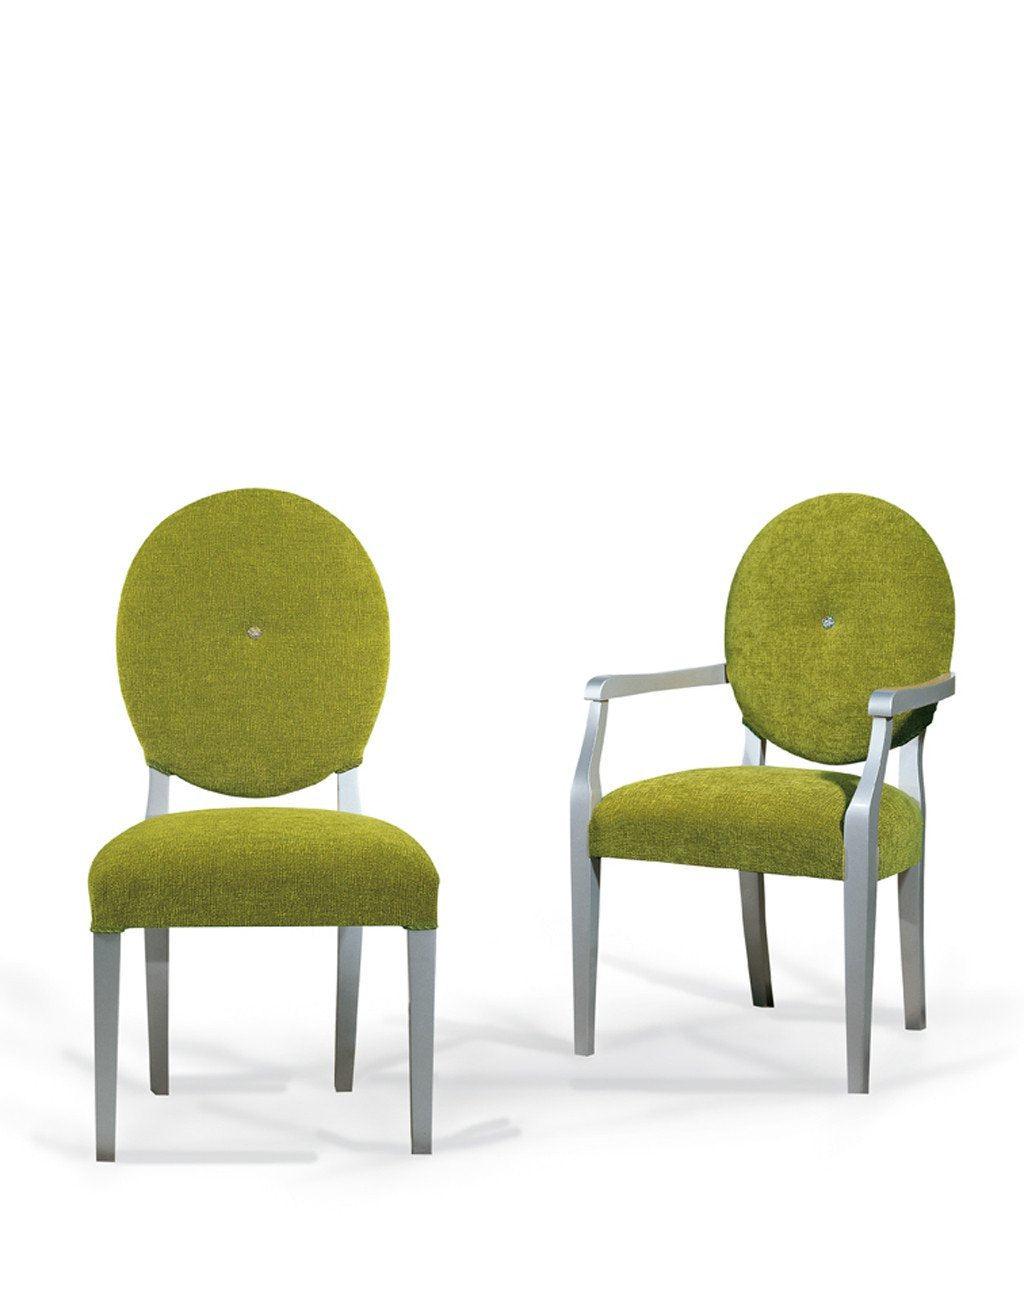 Favola Armchair-Seven Sedie-Contract Furniture Store